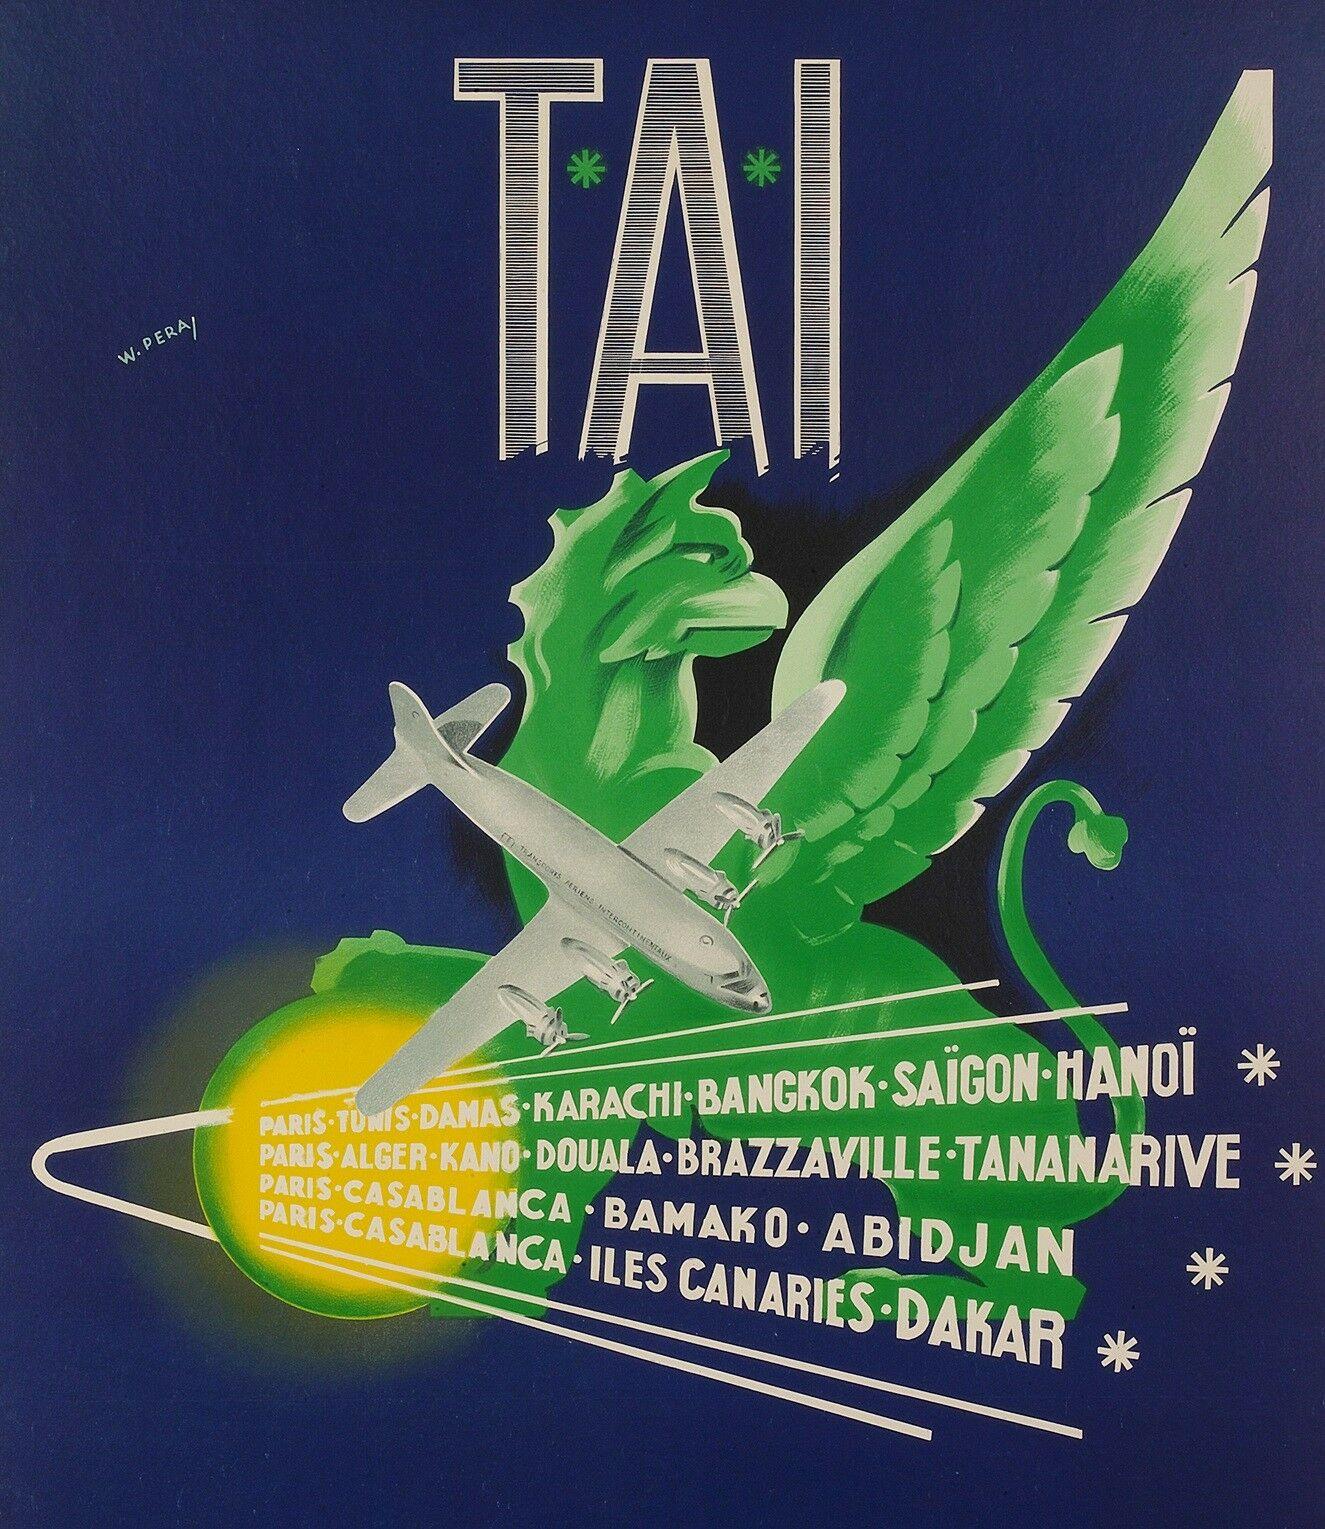 Original Aviation Poster-W. Pera-Tai-Africa-Asia-Indochina, c.1950

Transport Aériens Intercontinentaux (TAI) was a French private company established in 1946 and based at Orly Airport, Paris. In 1963, it merged with the Union. Aeromaritime